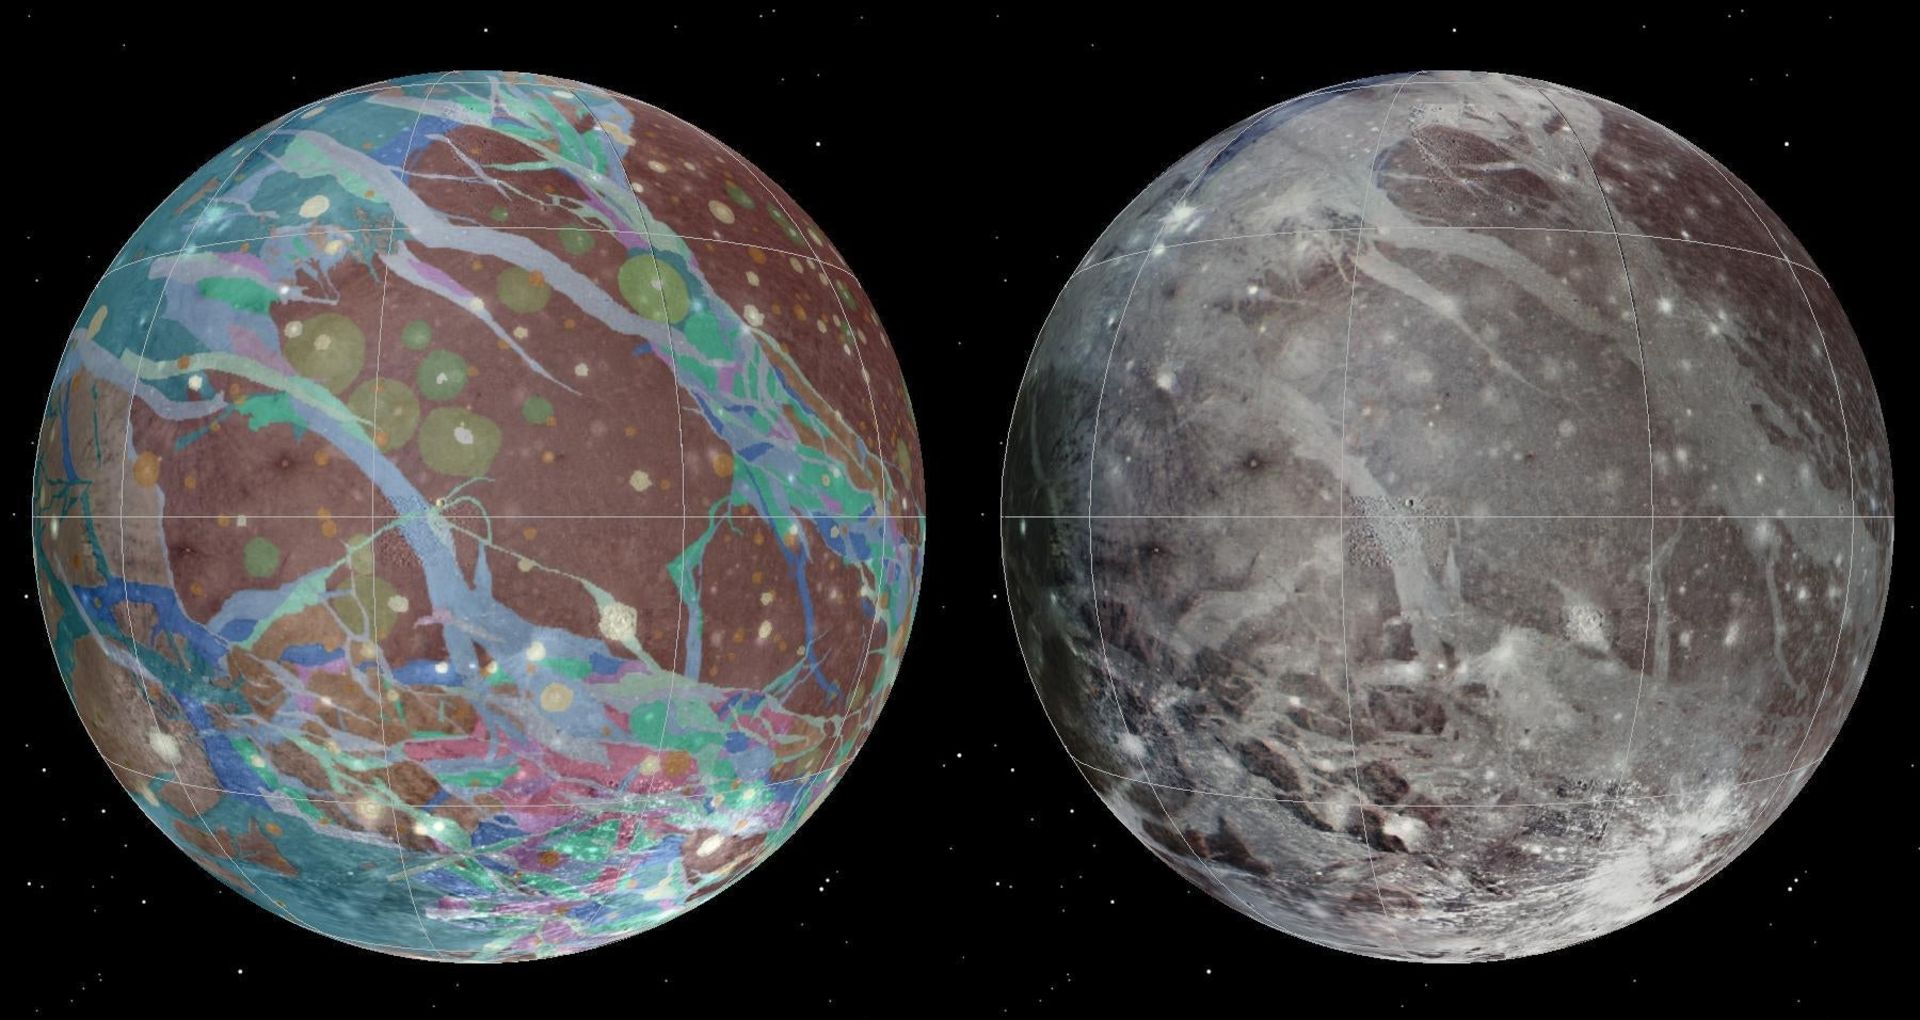 The mosaic and geologic maps of Jupiter’s moon Ganymede